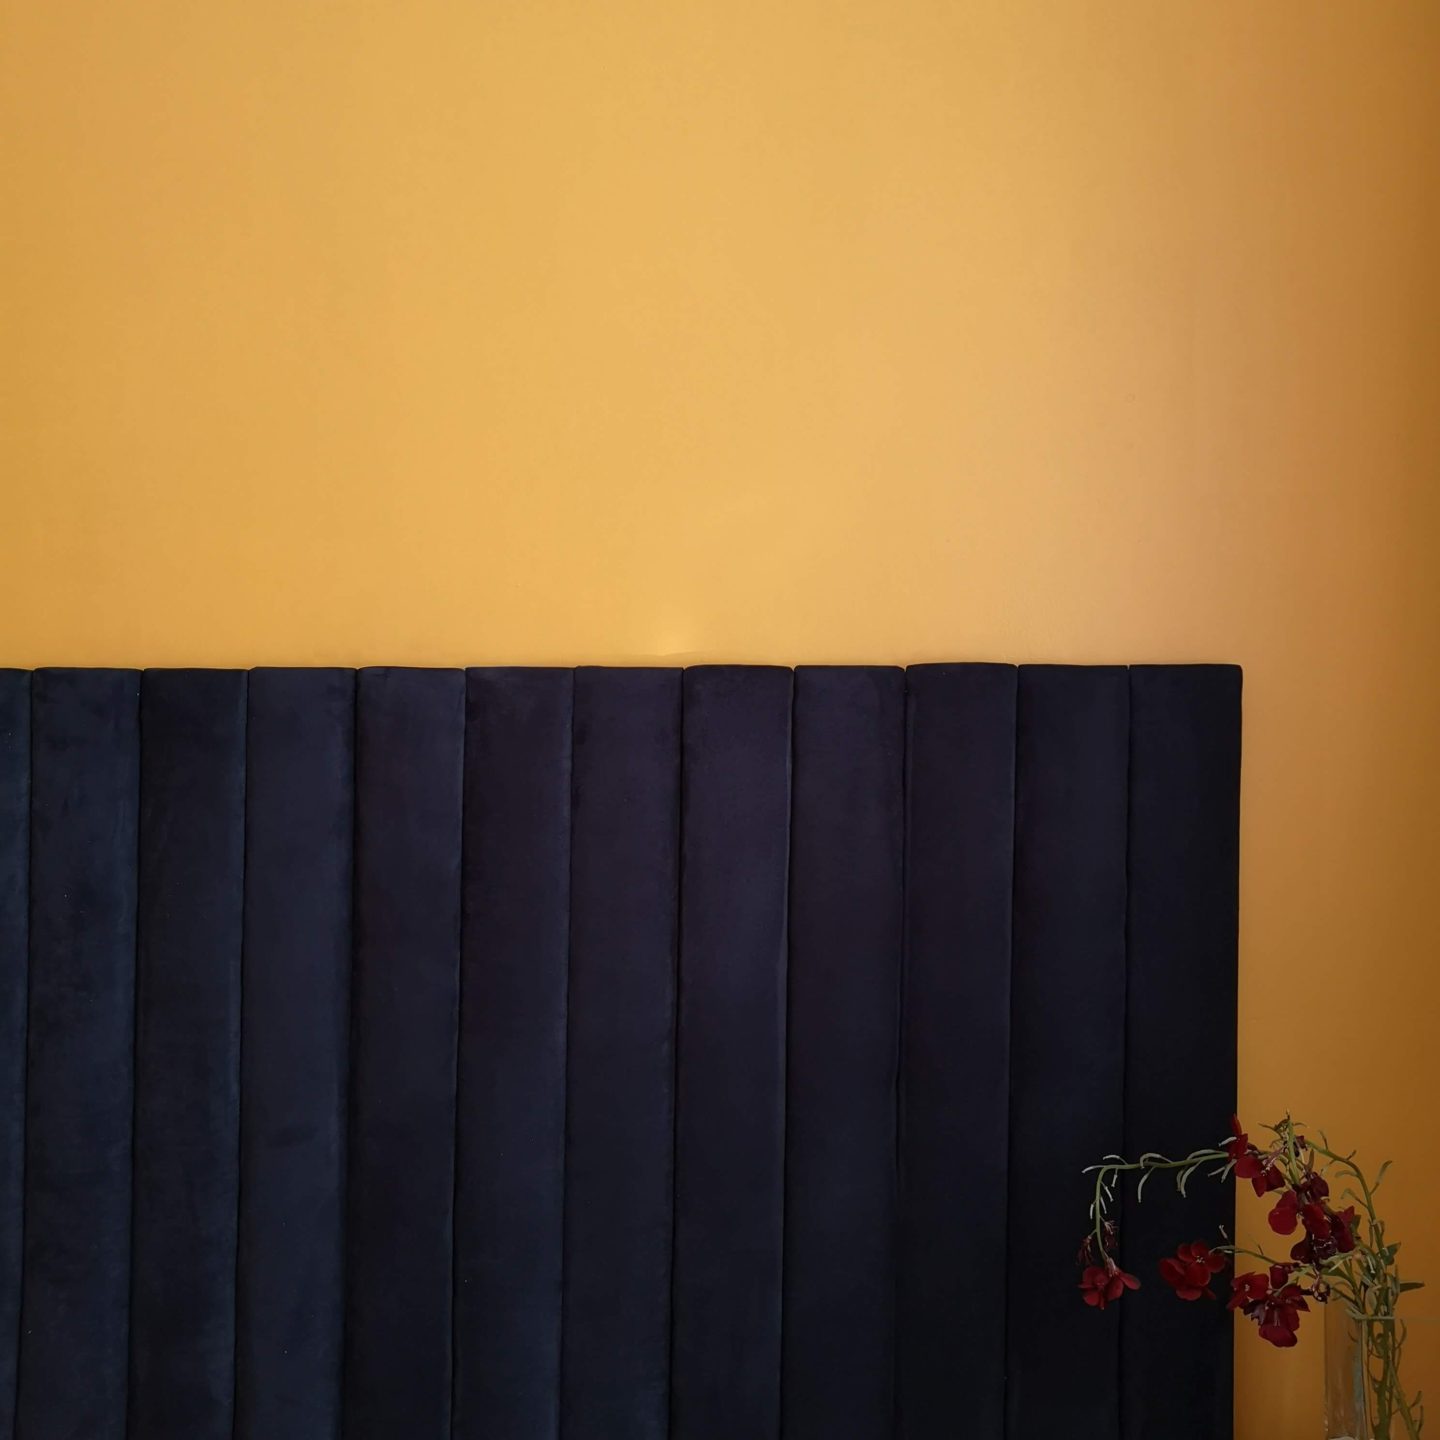 Navy suede fabric headboard set against a mustard wall. Deep red wallflowers to the side.